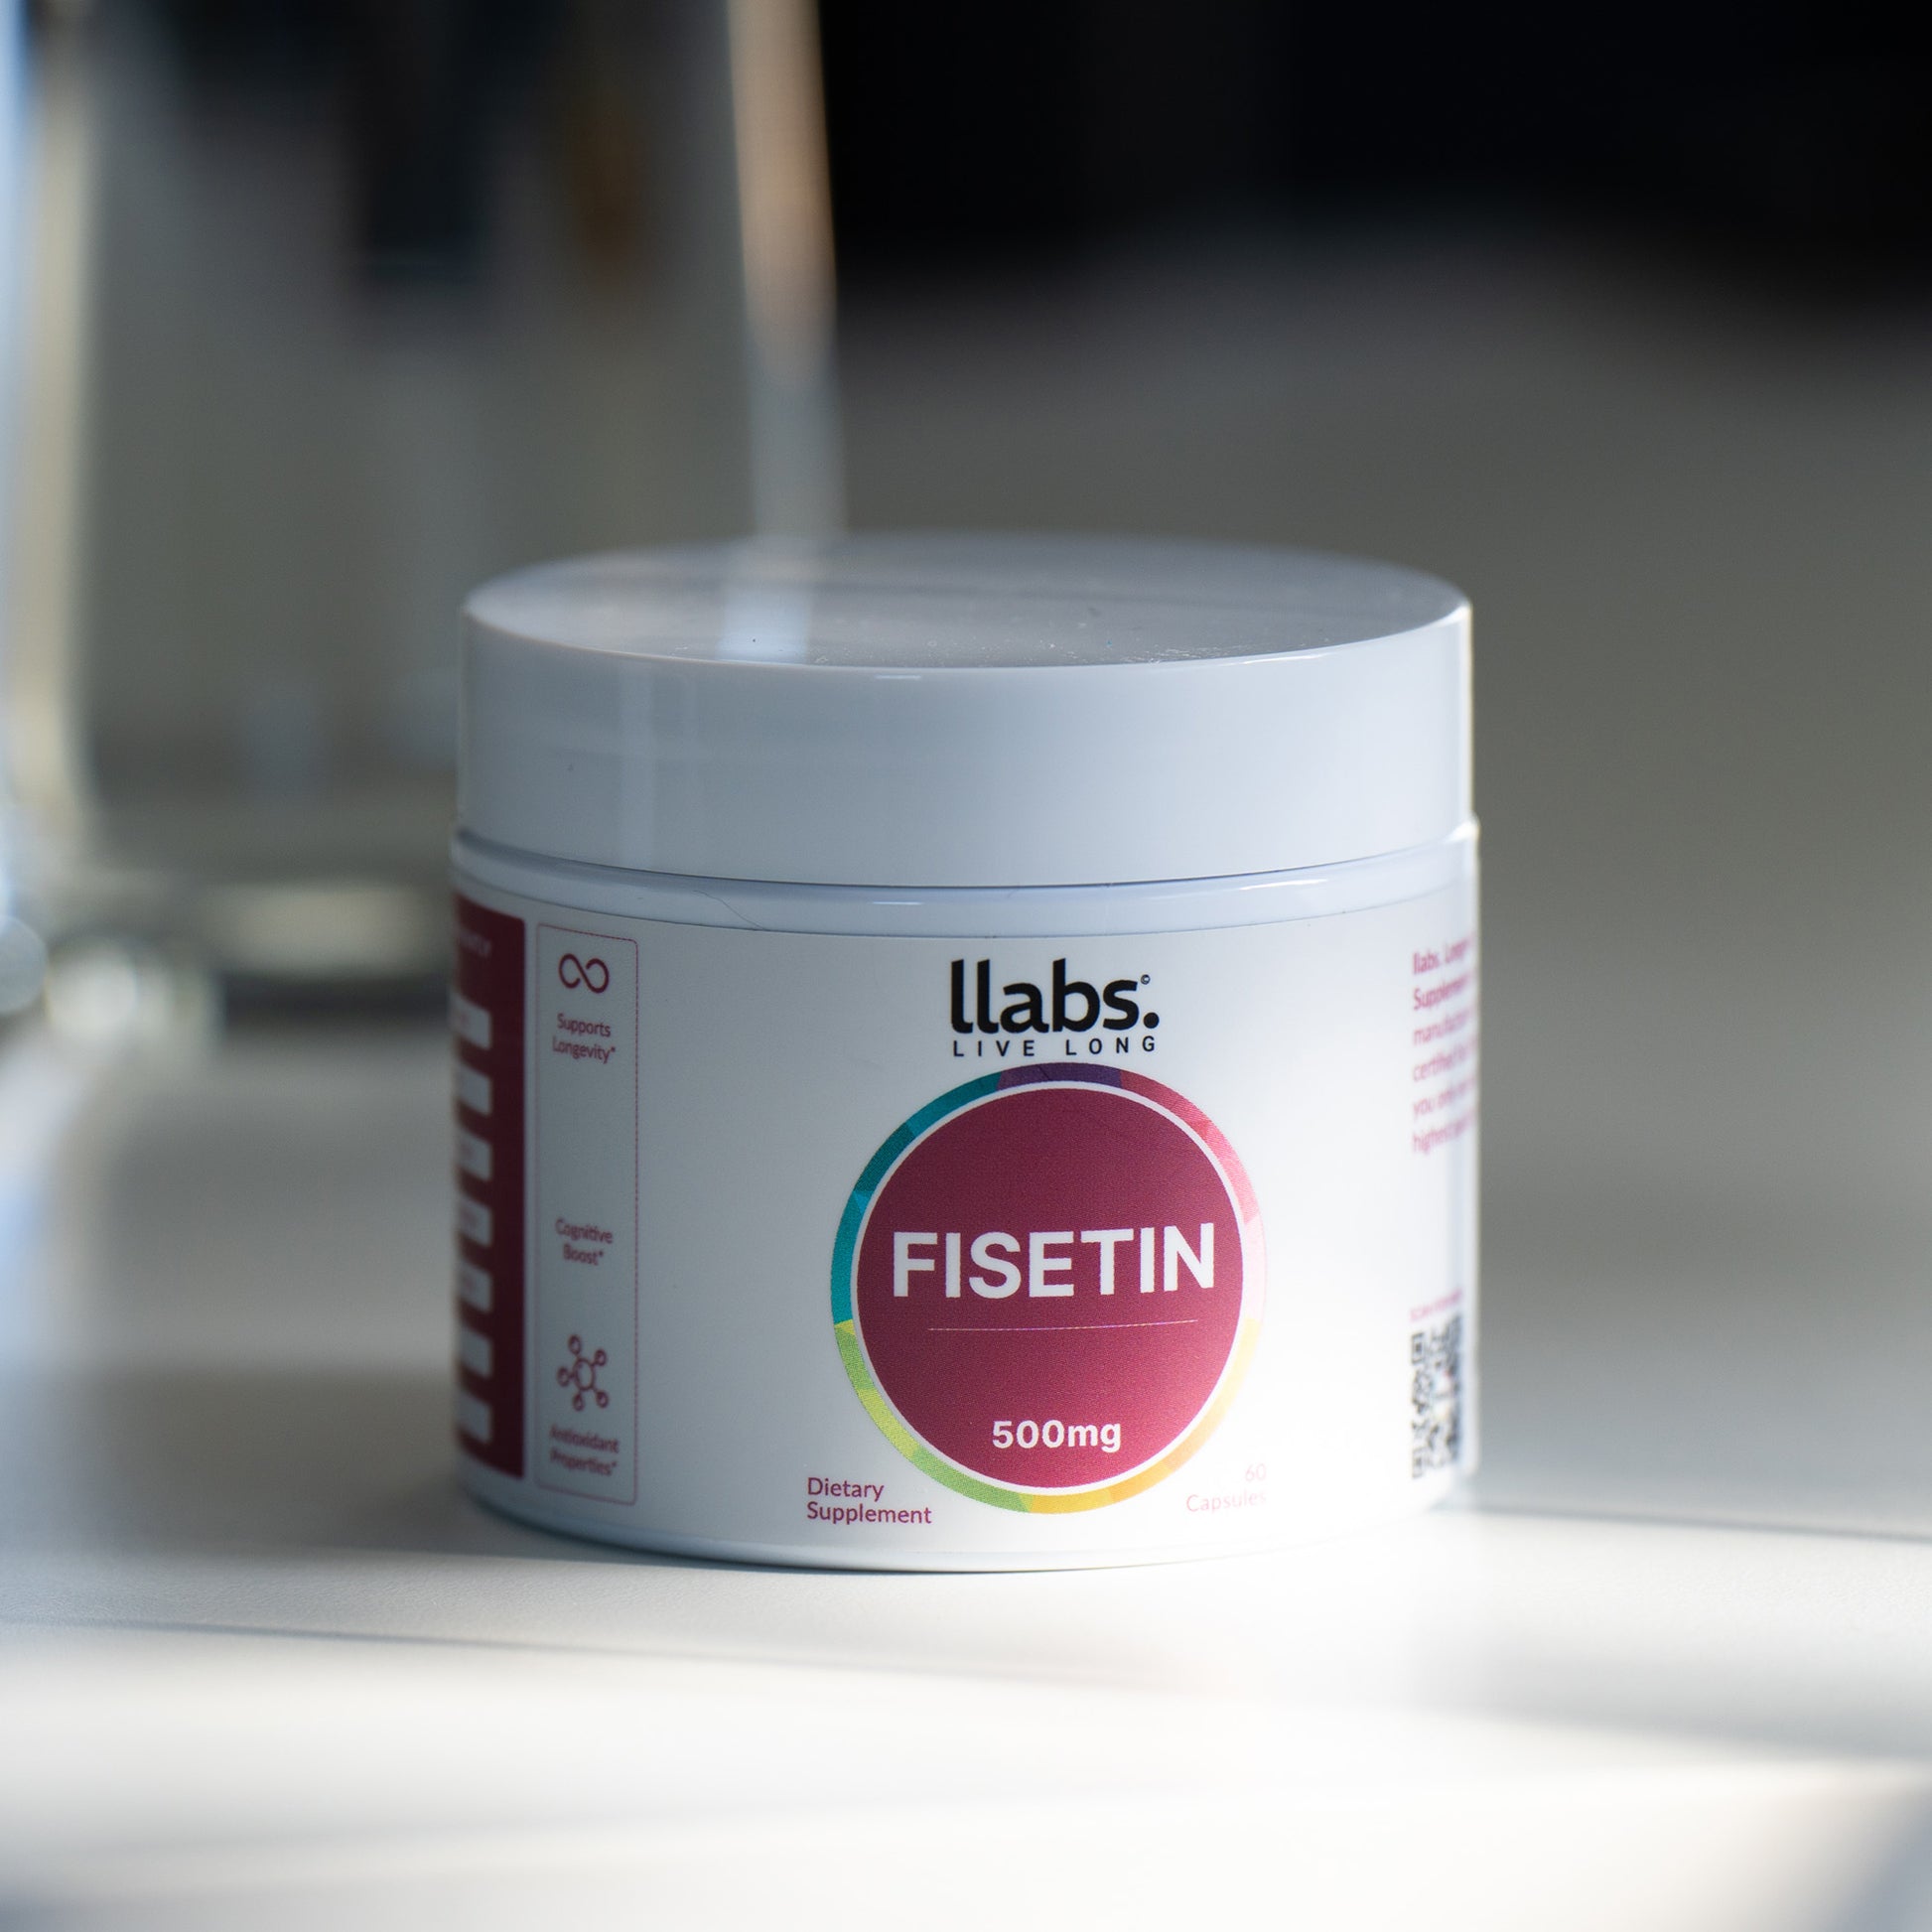 A container of llabs fisetin capsules - 2 months supply with a 500mg label, resting on a surface under natural light.